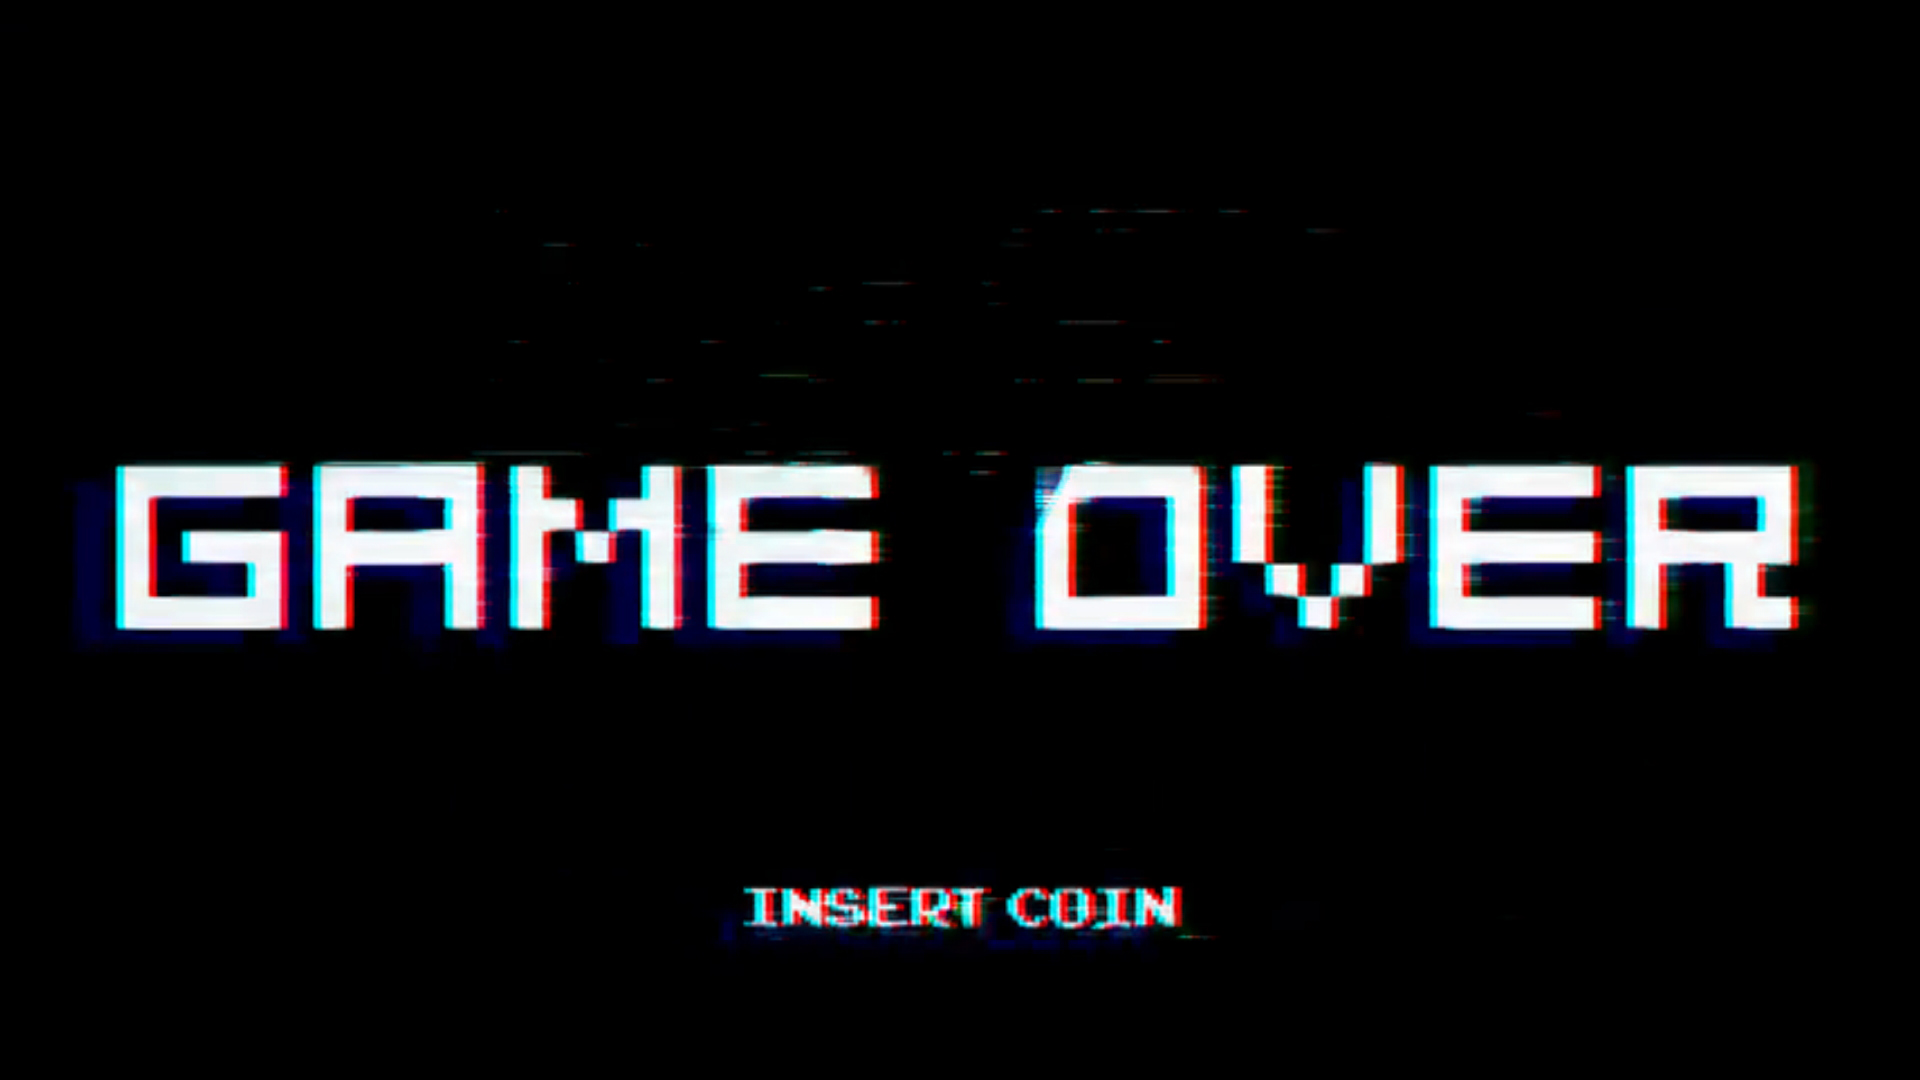 arcade, GAME OVER, Video games, Simple, Chromatic aberration, Typography Wallpaper